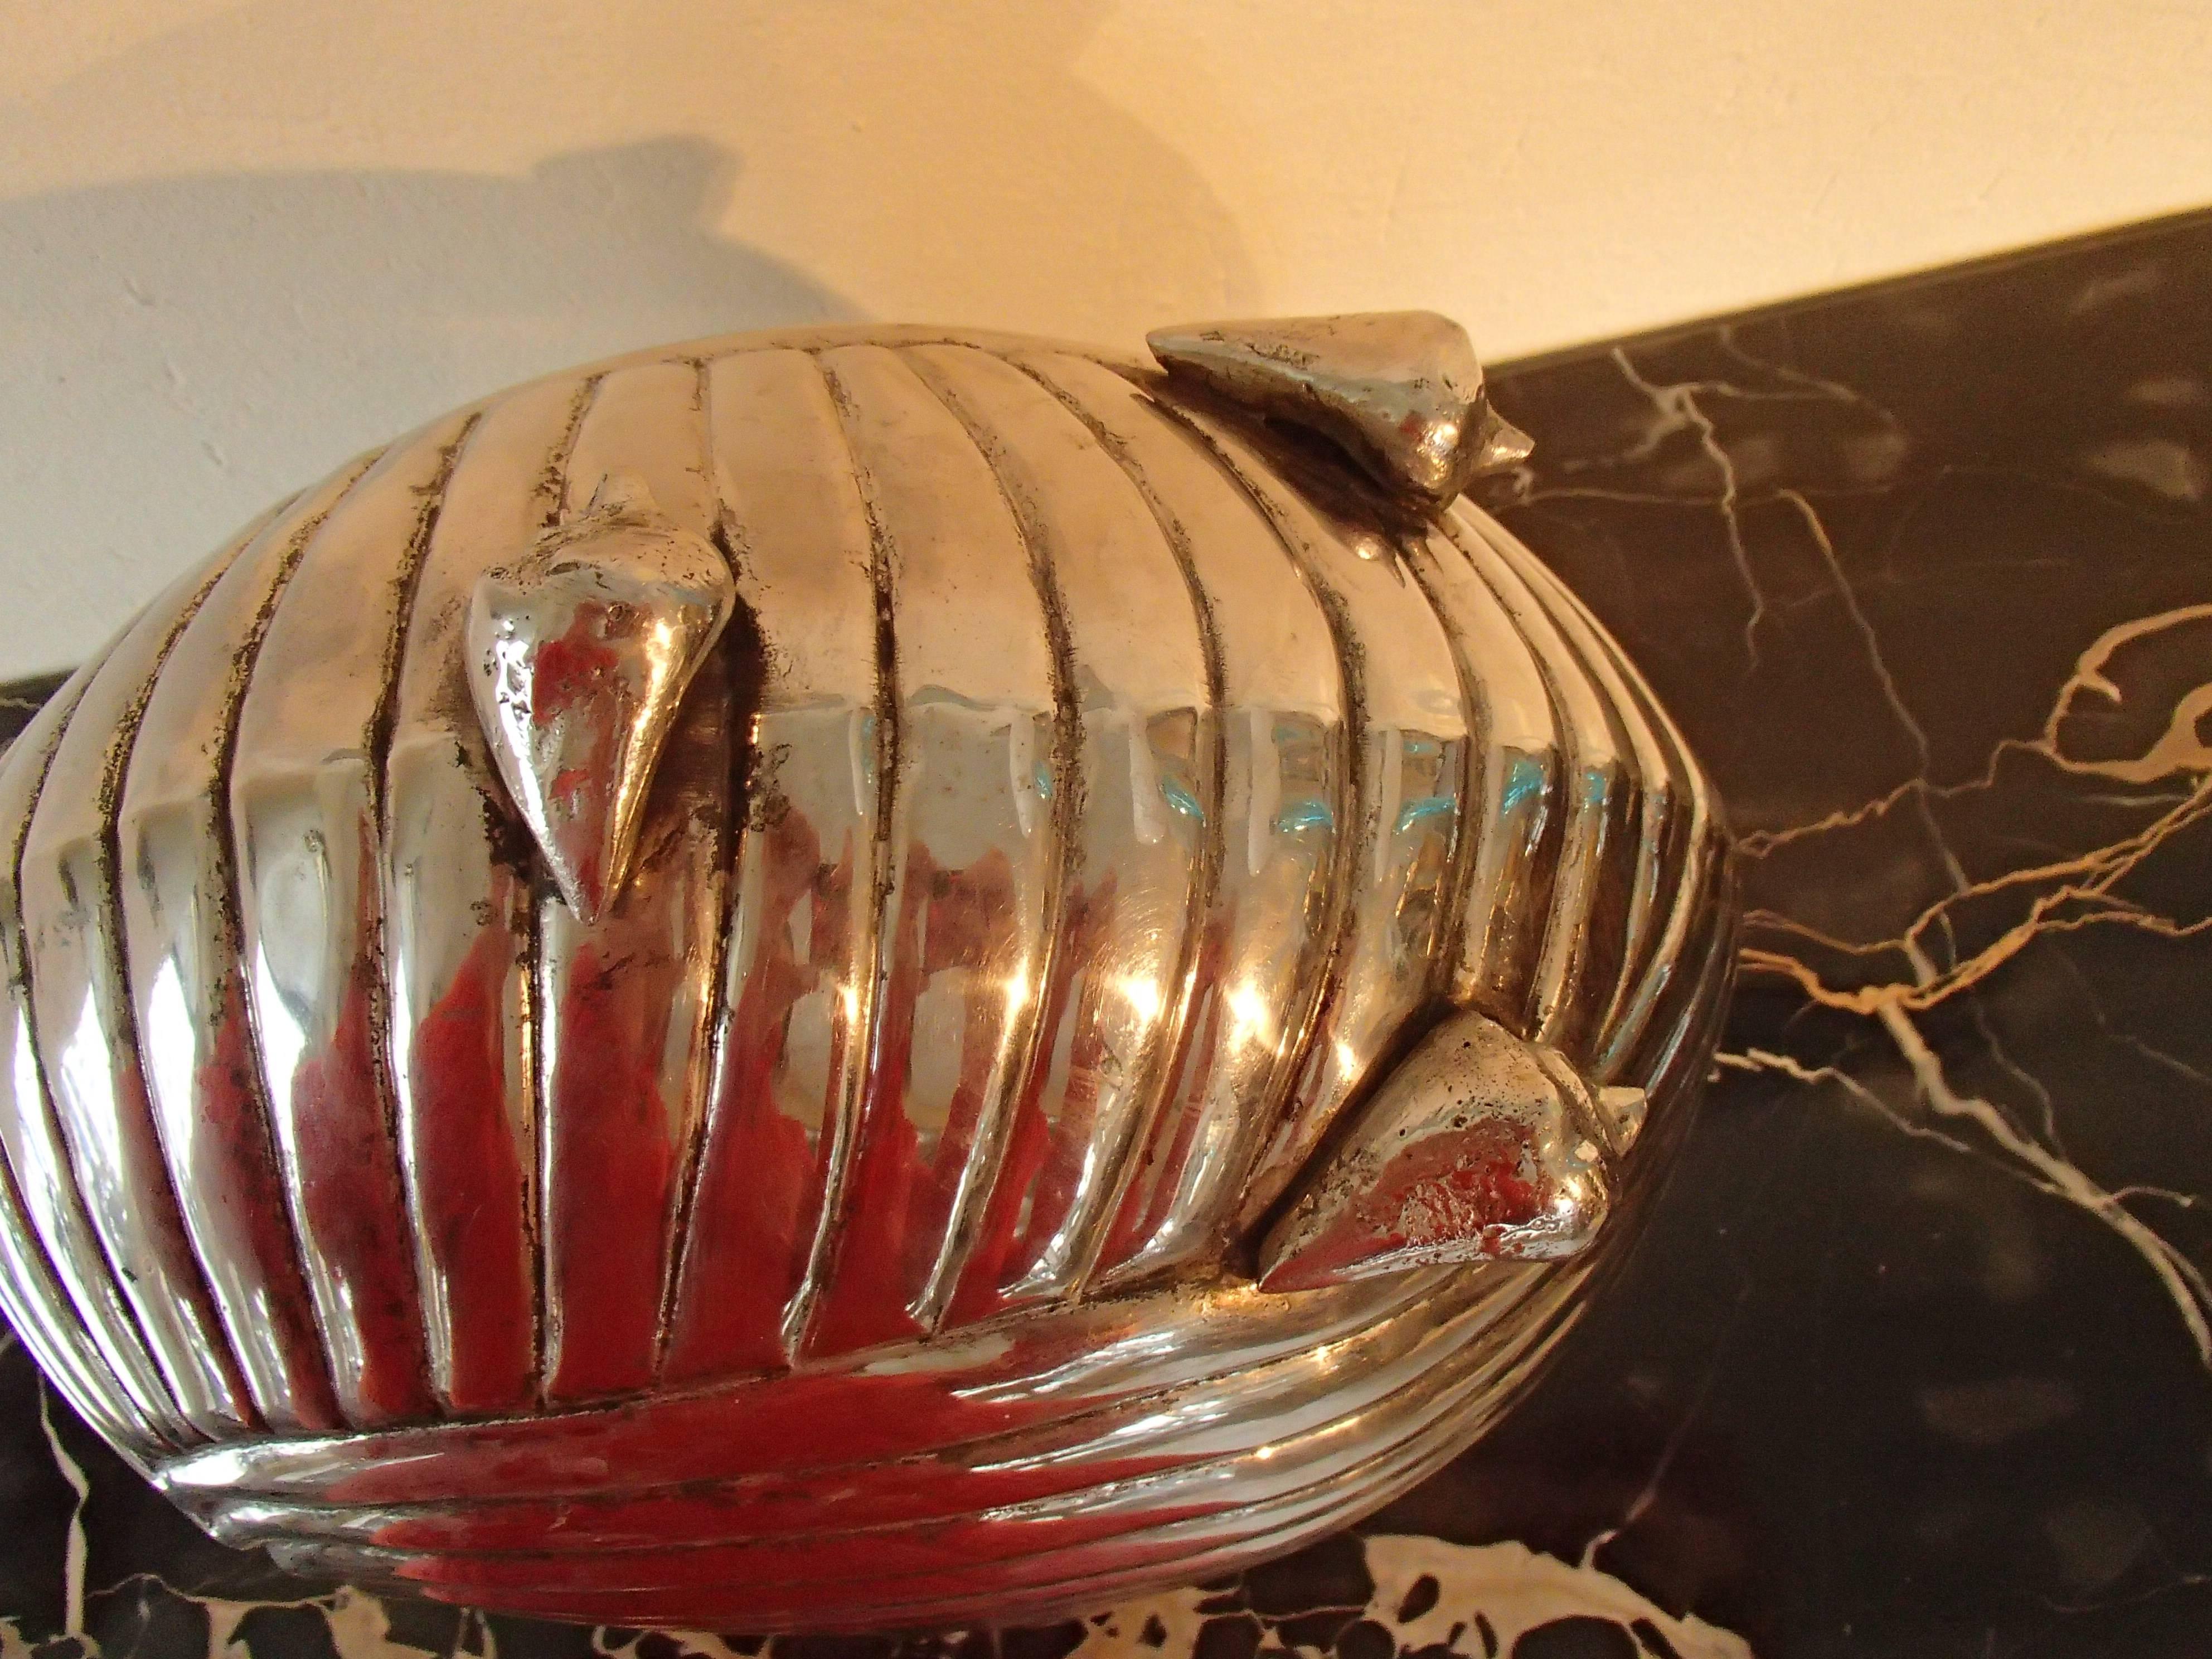 Modern champagne or vine cooler like a shell seen in 